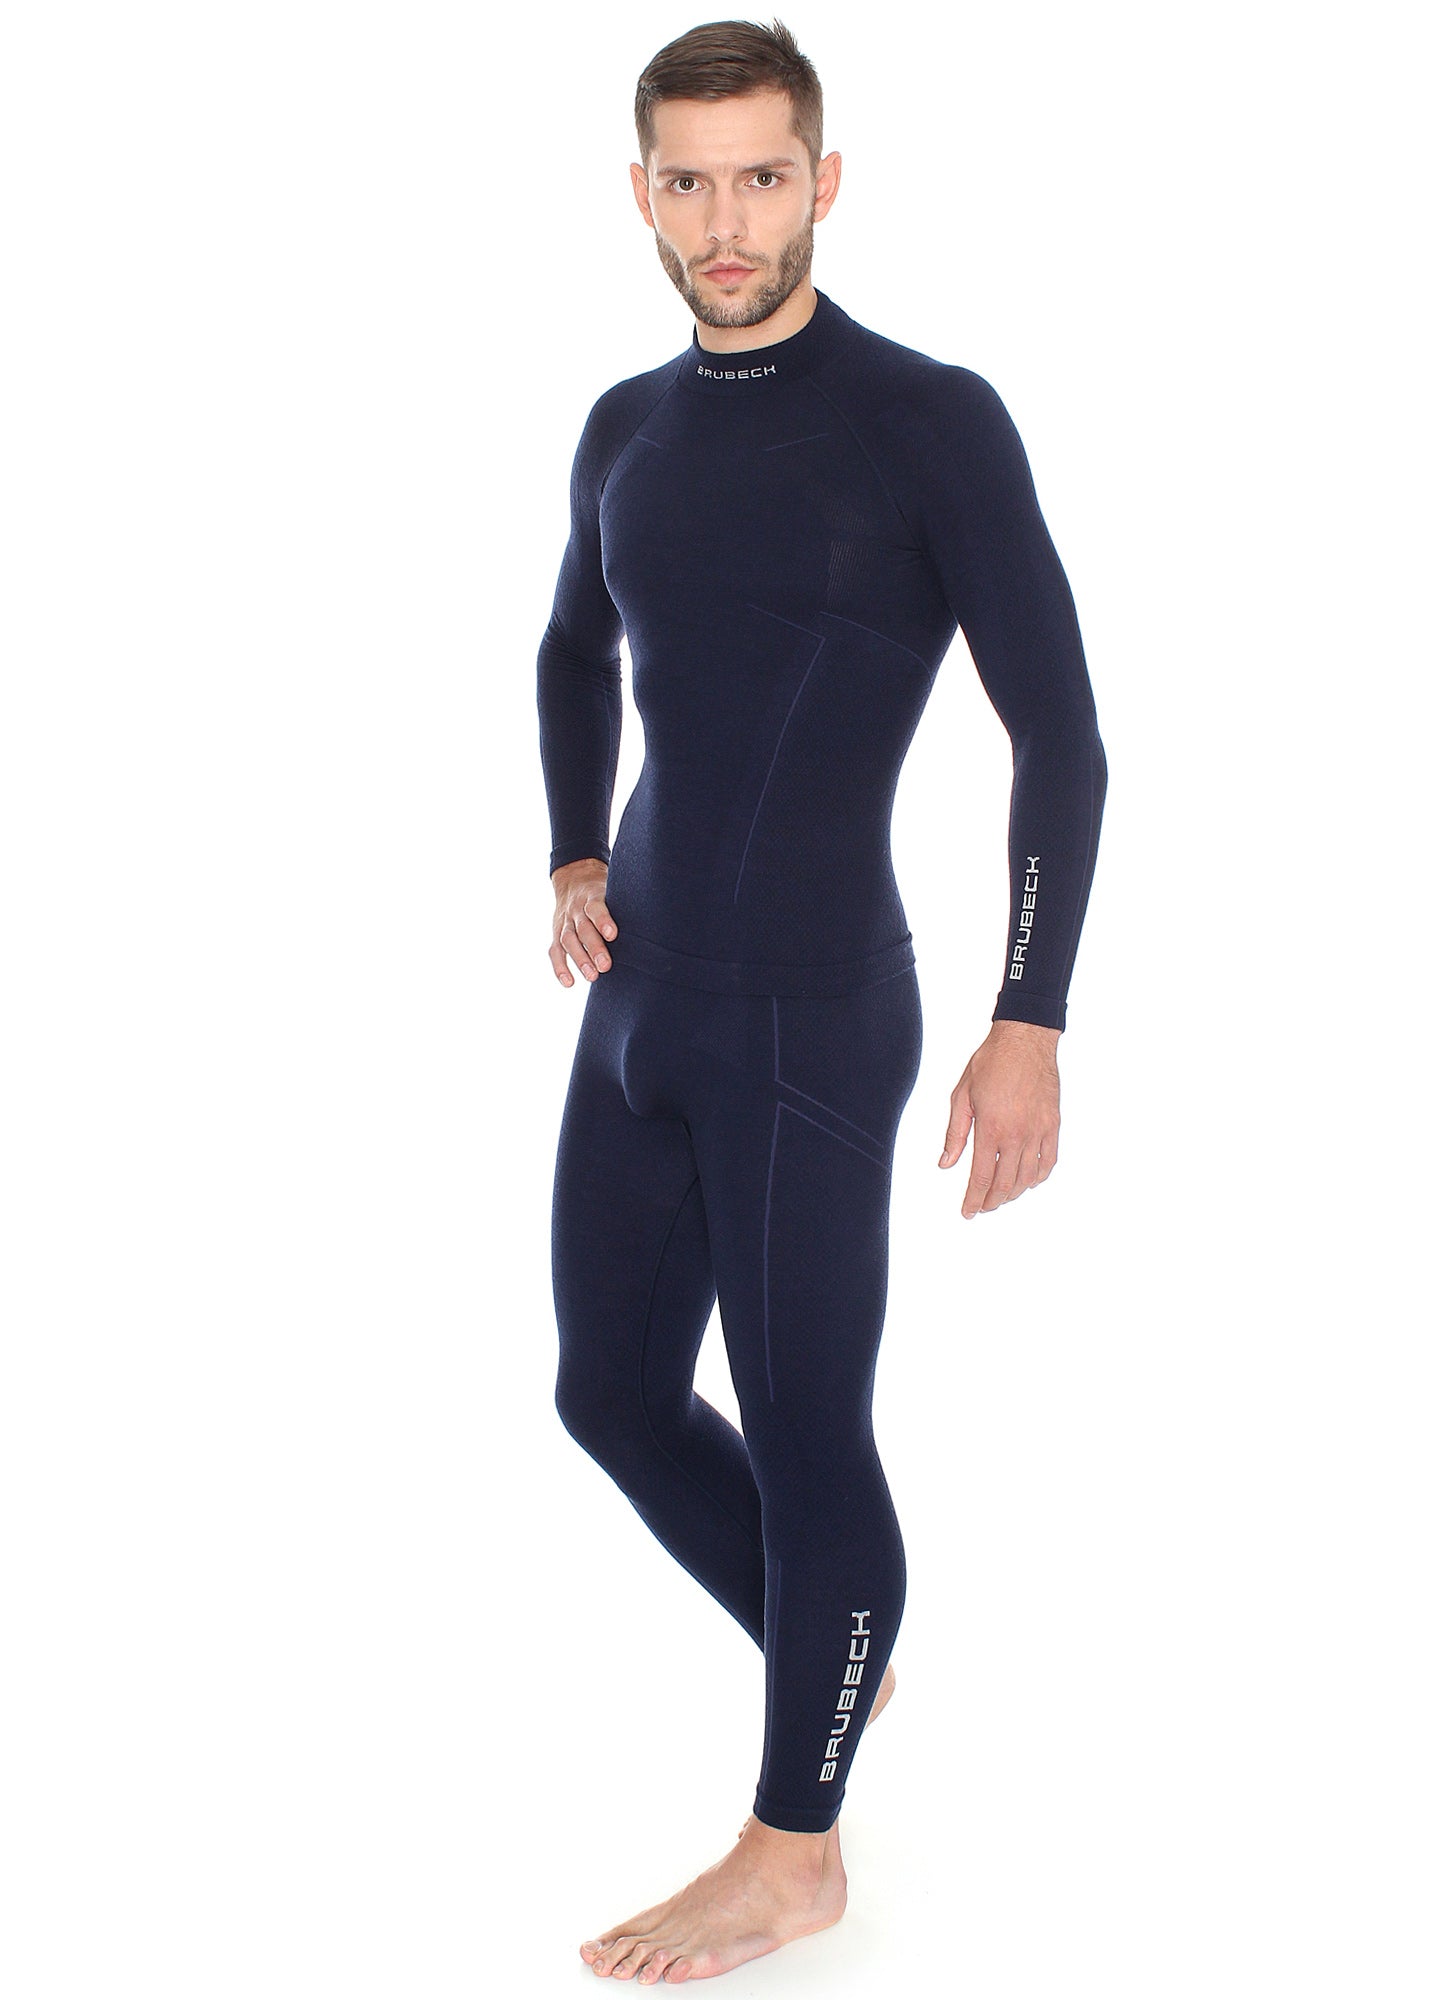 Men's EXTREME WOOL navy blue long-sleeve shirt paired with matching fitted athletic  tights for immense moisture wicking and temperature controlled bliss